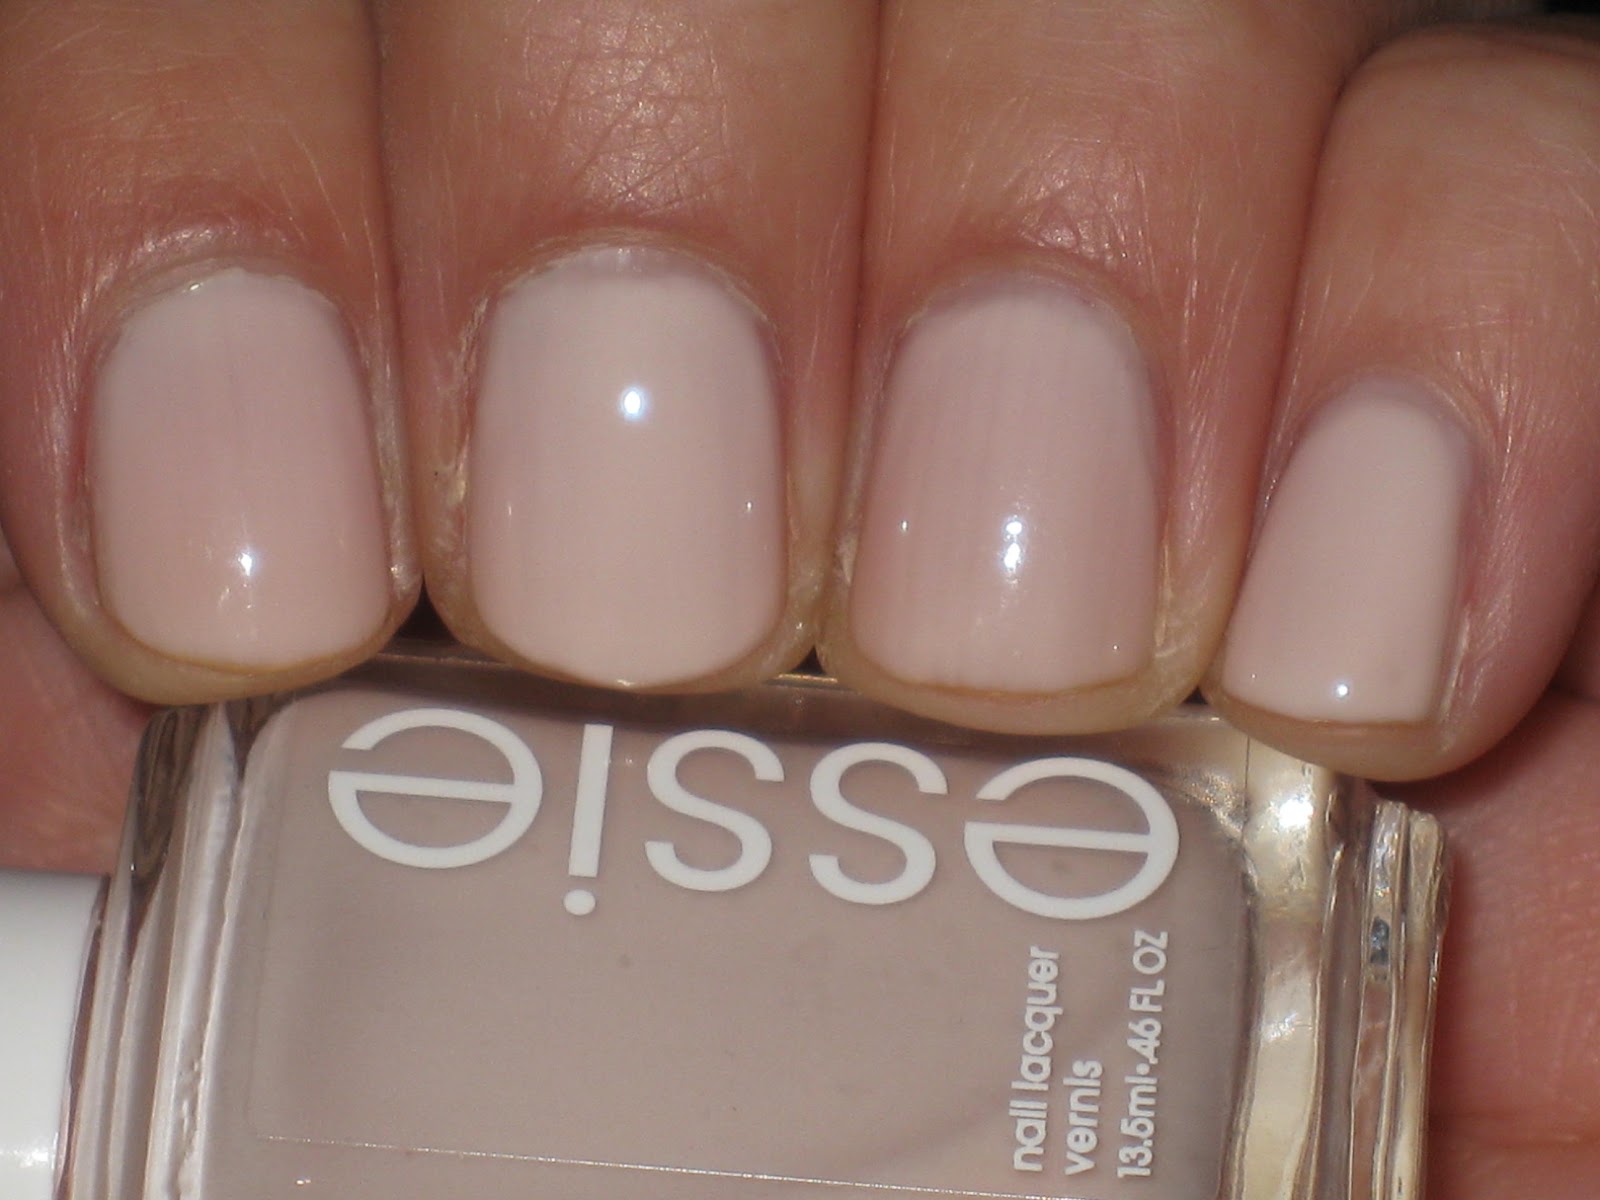 2. Essie Nail Polish in "Ballet Slippers" - wide 1